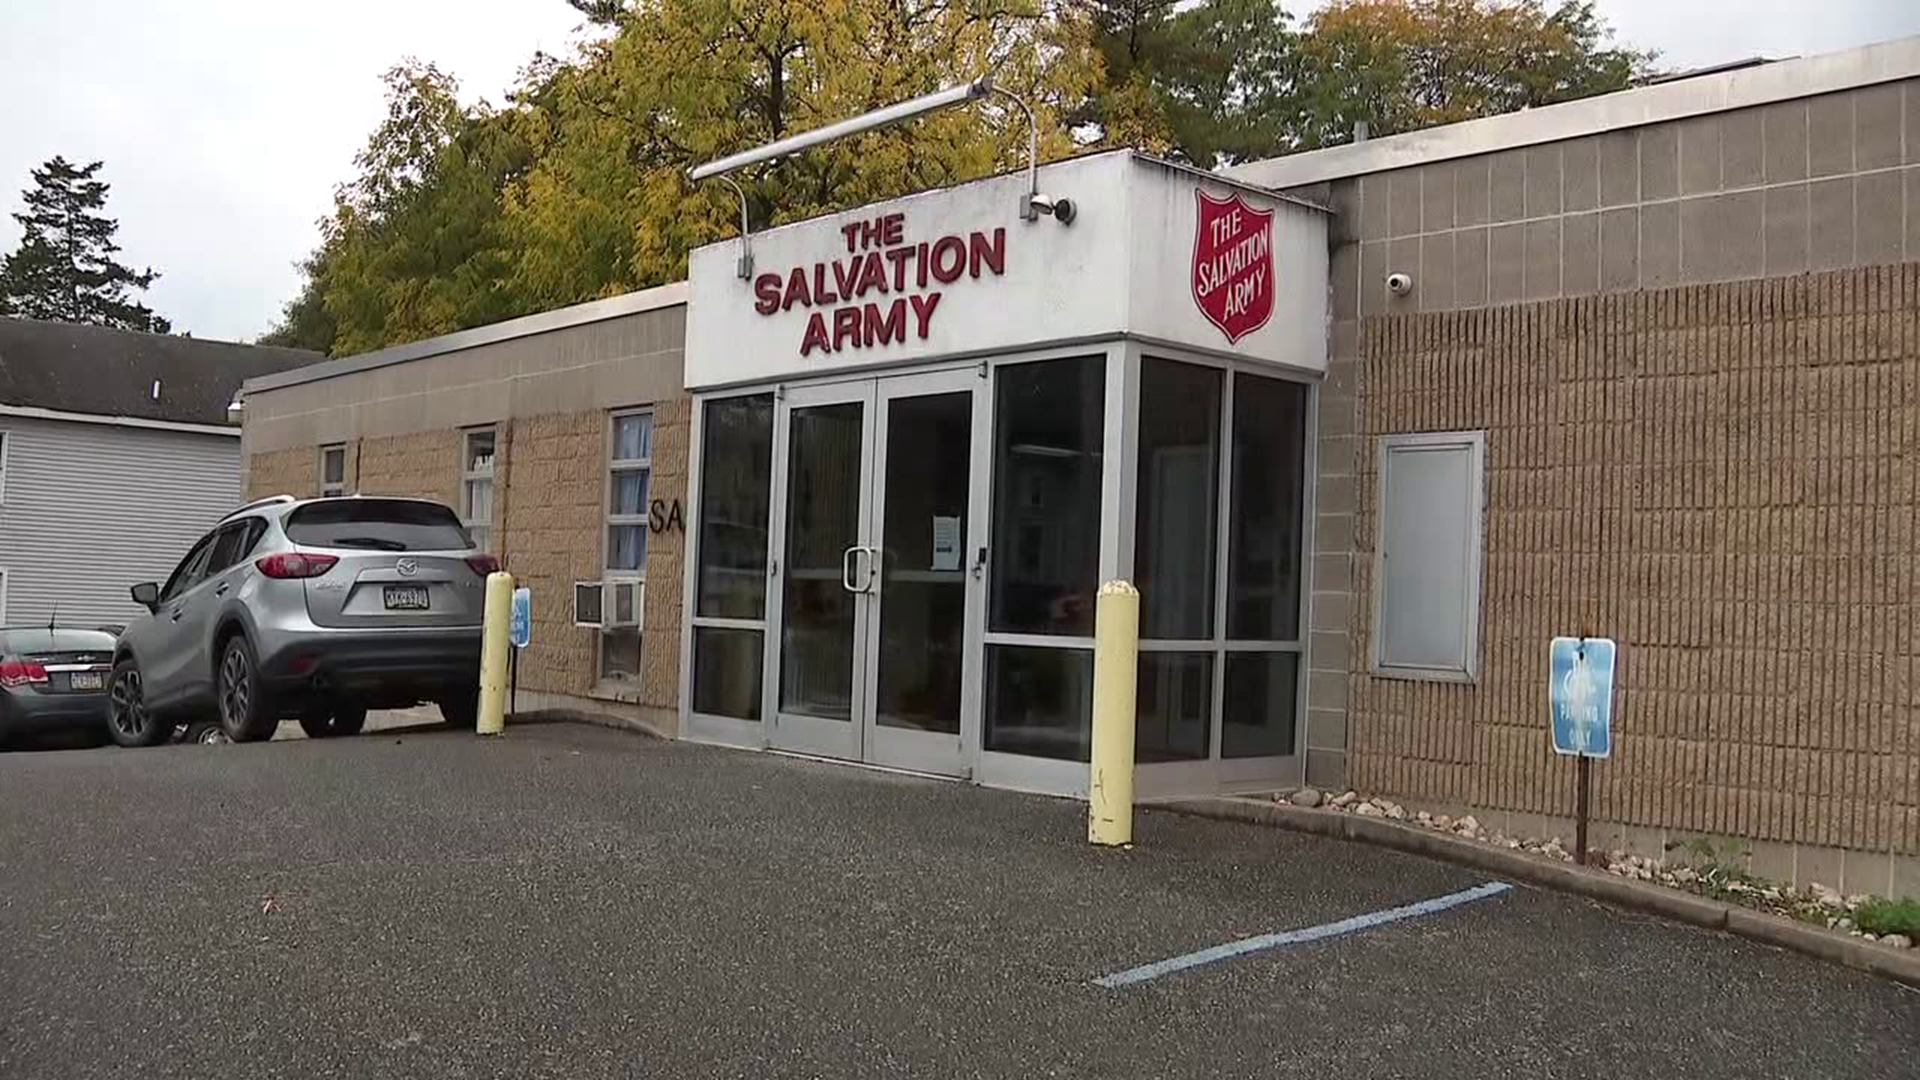 Because of the pandemic, the East Stroudsburg Salvation Army is preparing for the holiday season early this year.